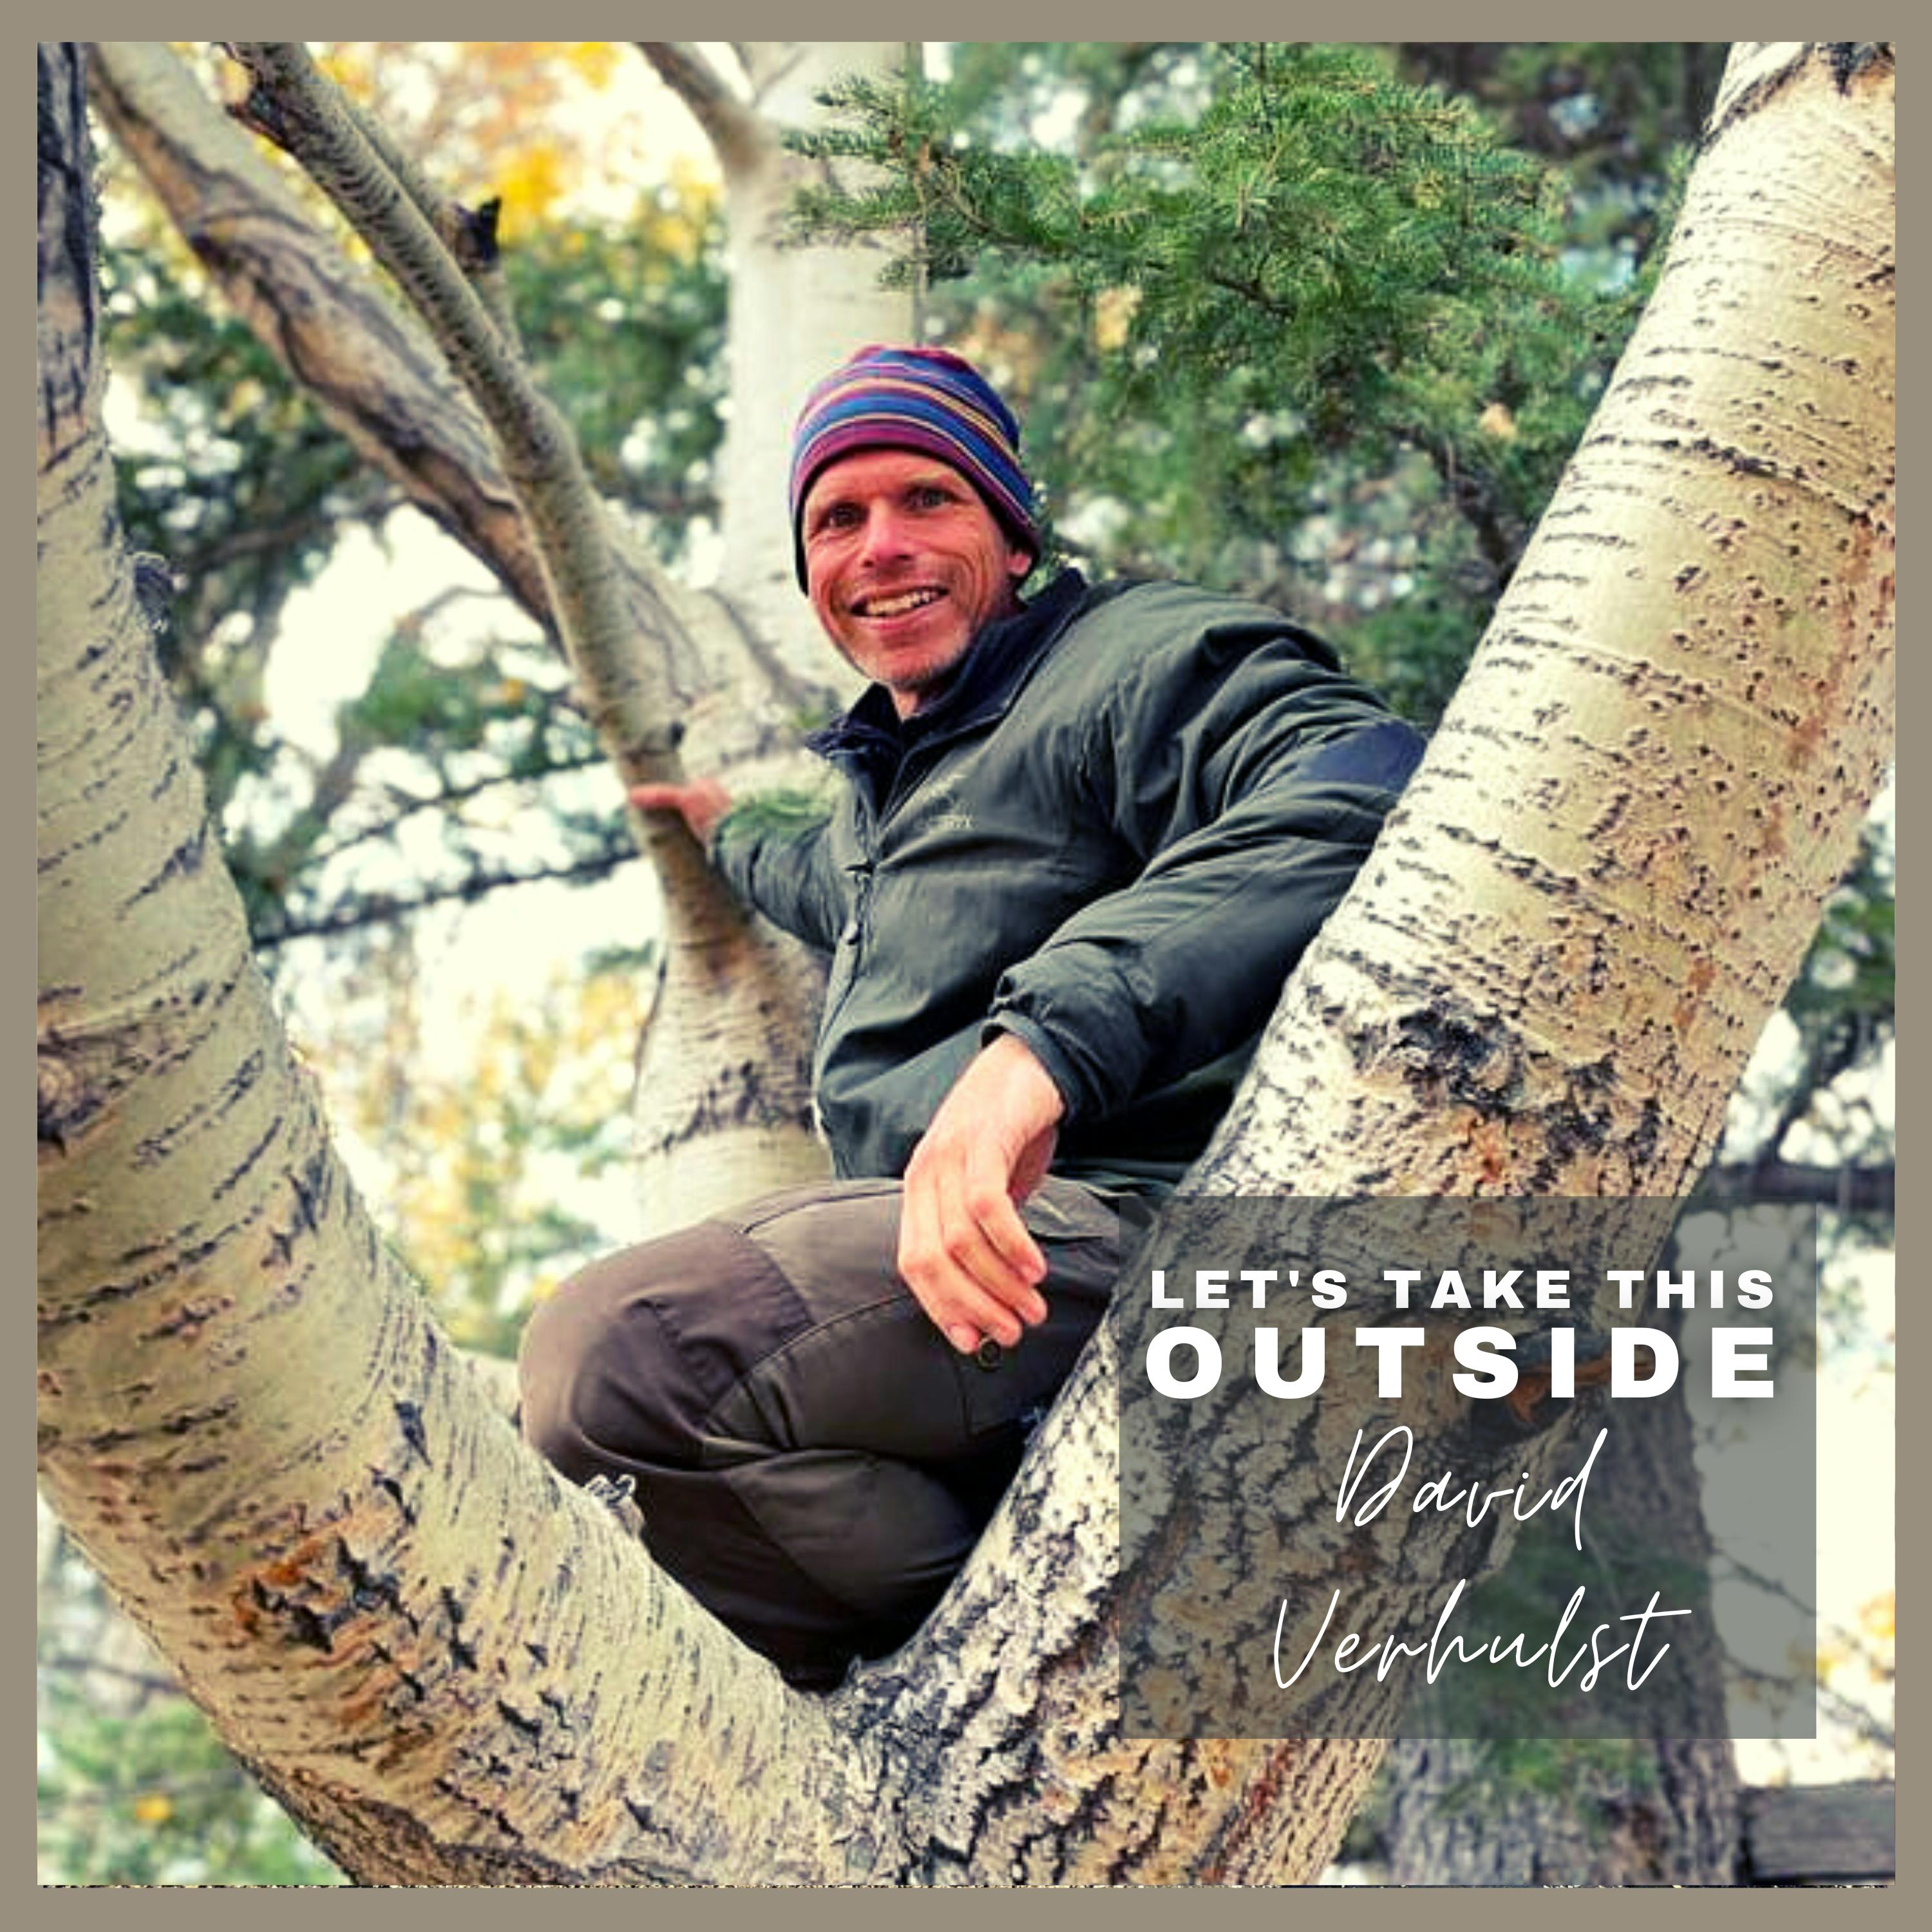 David Verhulst - Co-Founder of Forest Play Image